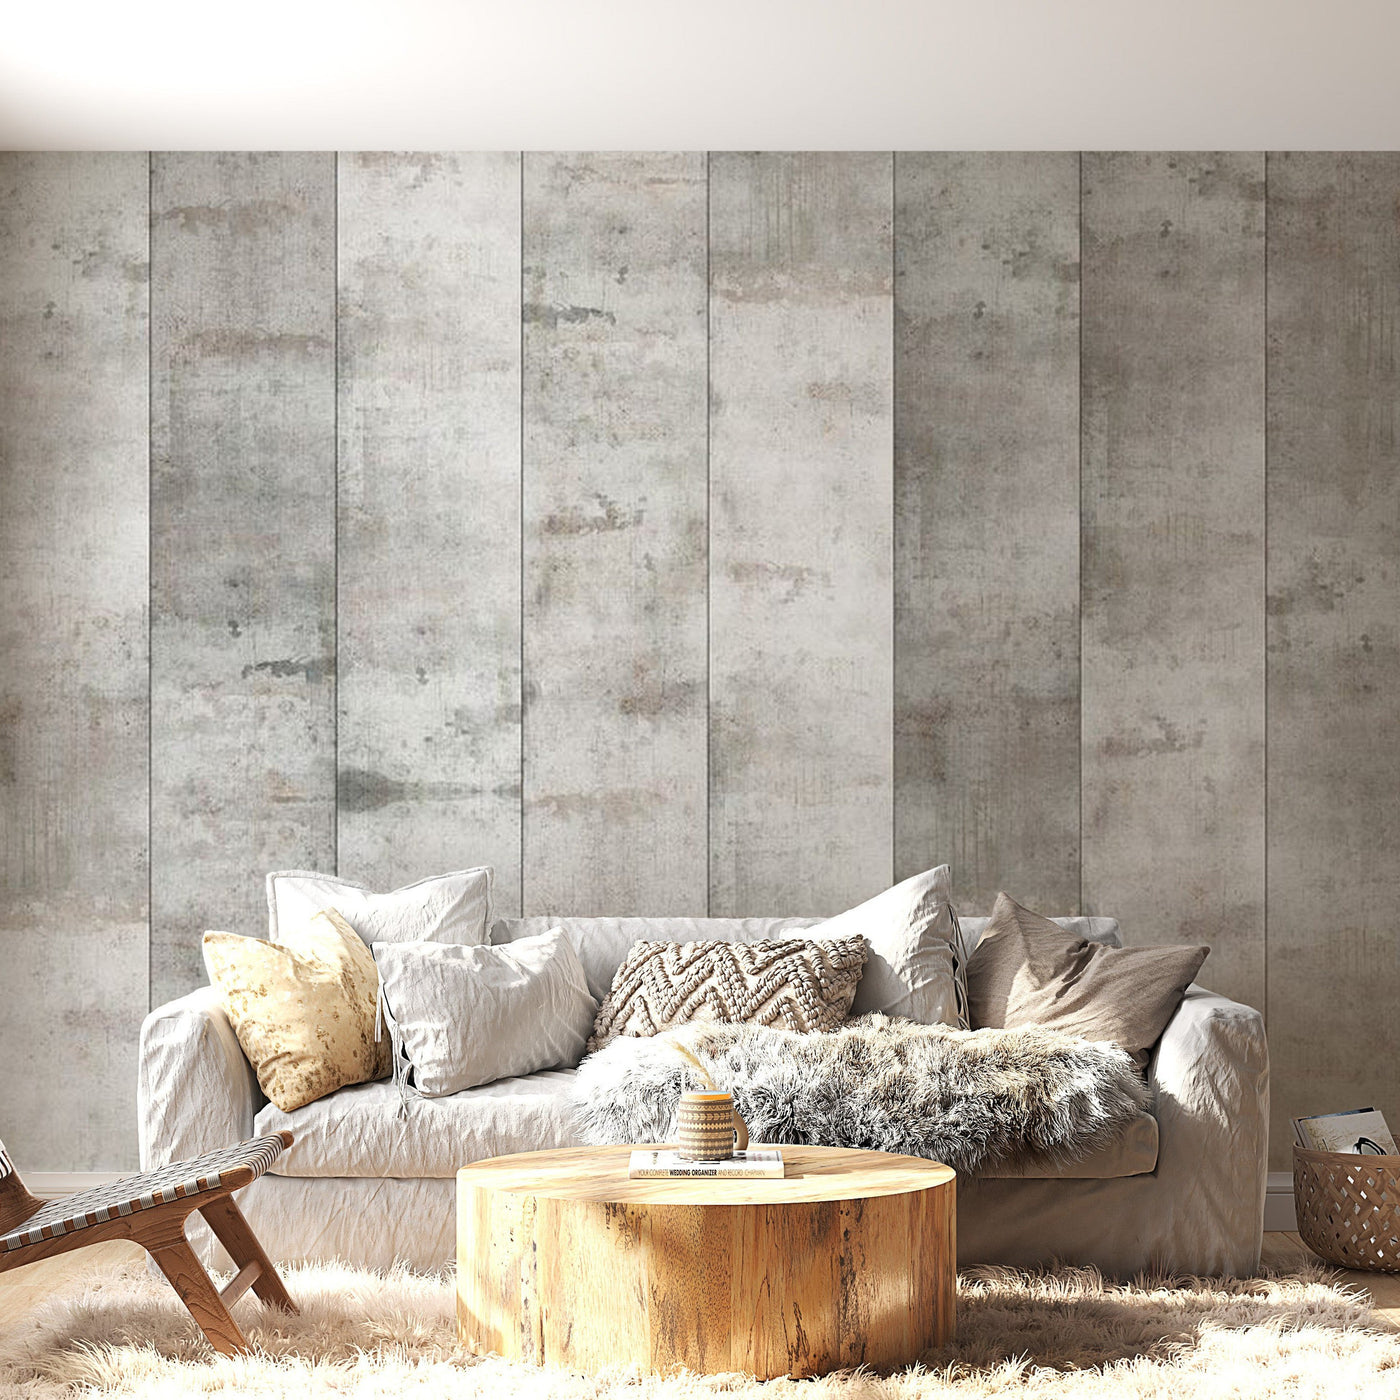 Peel & Stick Wall Mural - Concrete Mosaic - Removable Wall Decals